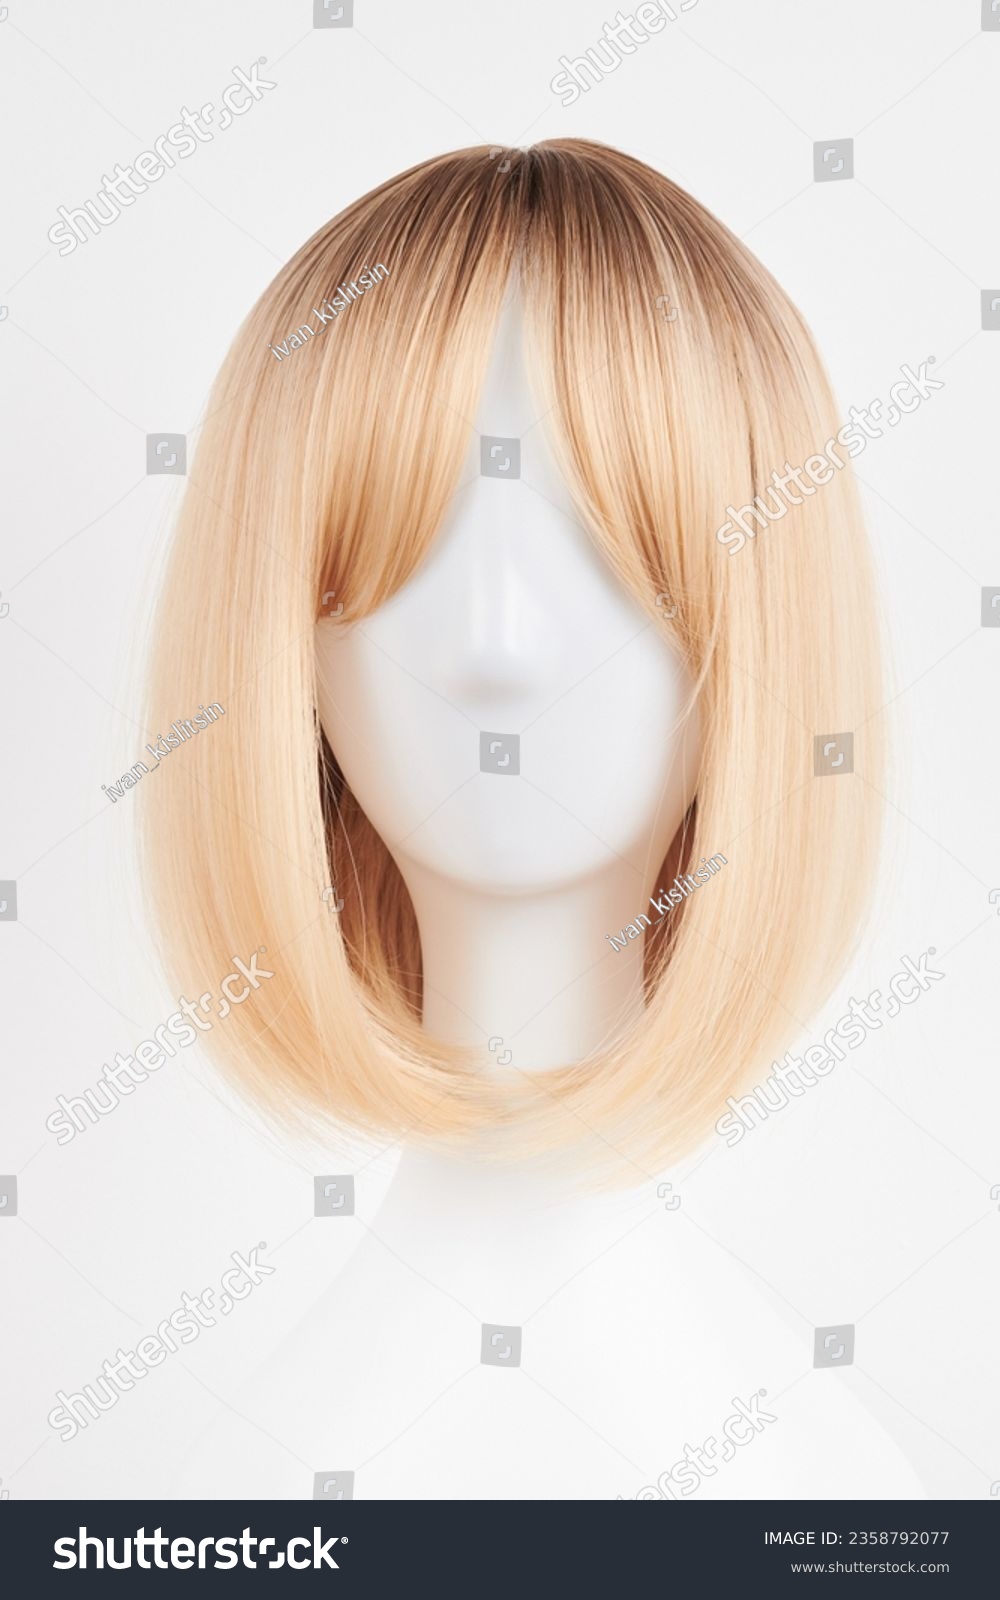 Natural looking blonde fair wig on white mannequin head. Short hair cut on the plastic wig holder isolated on white background, front view
 #2358792077